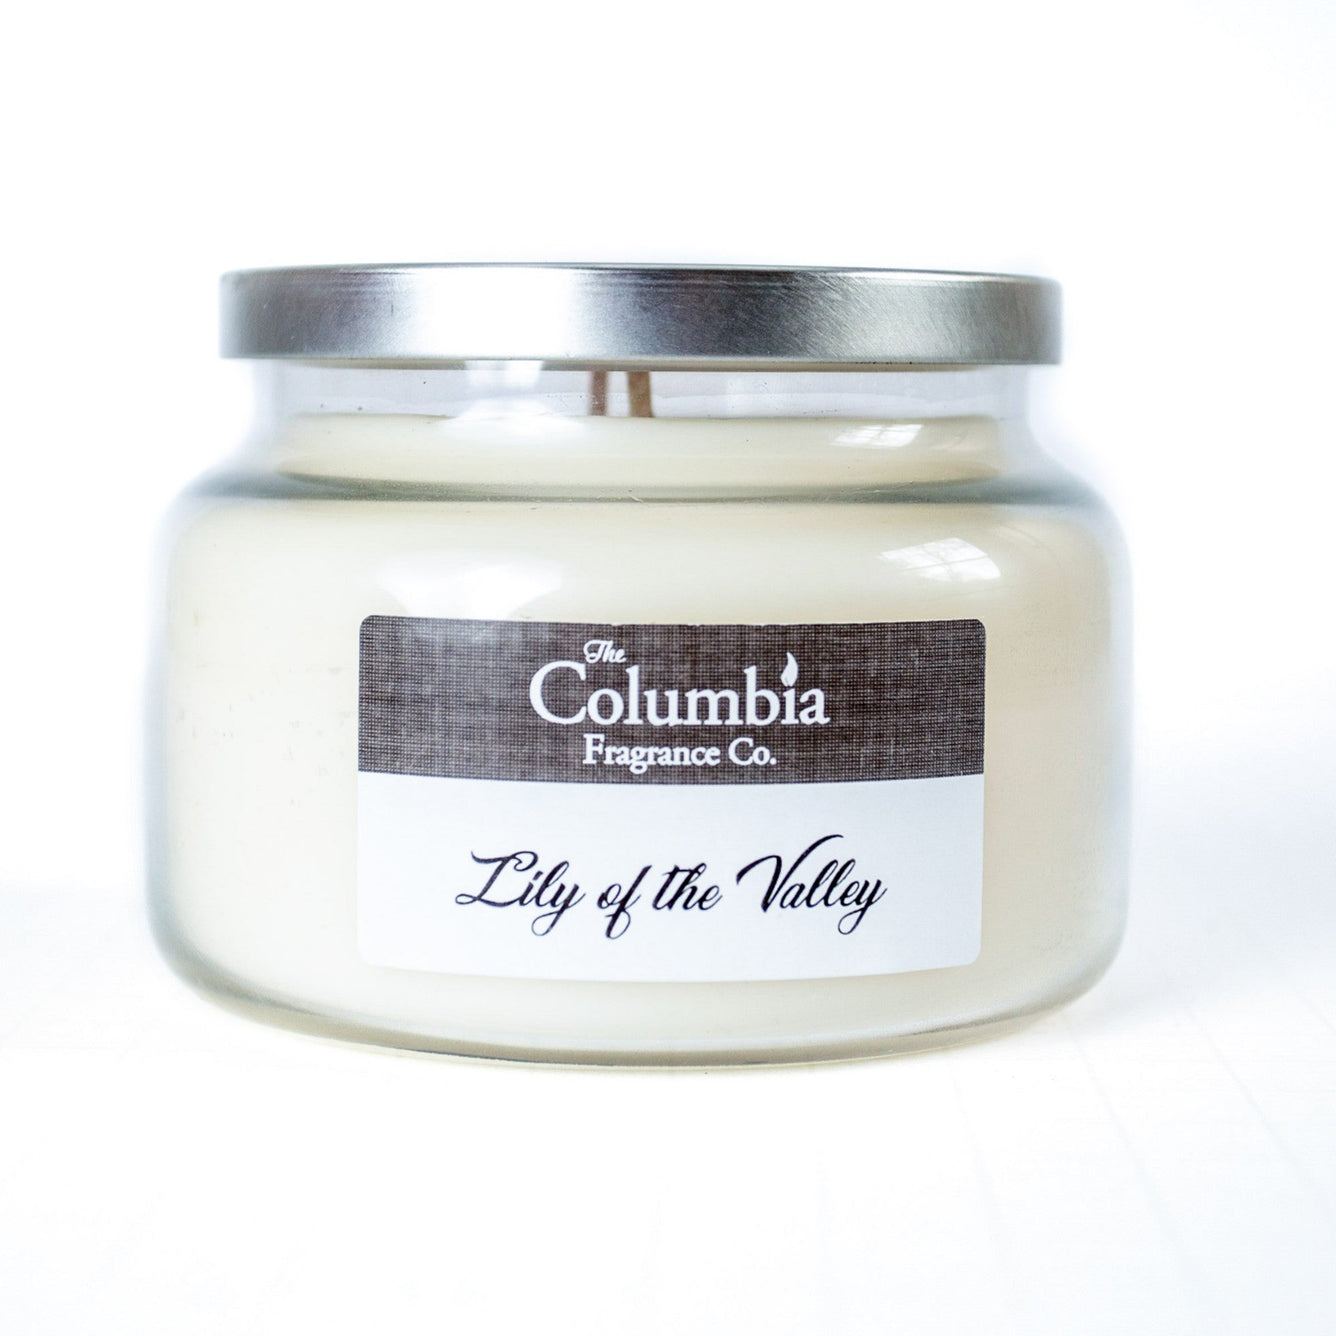 lily of the valley candles and home fragrances - 1